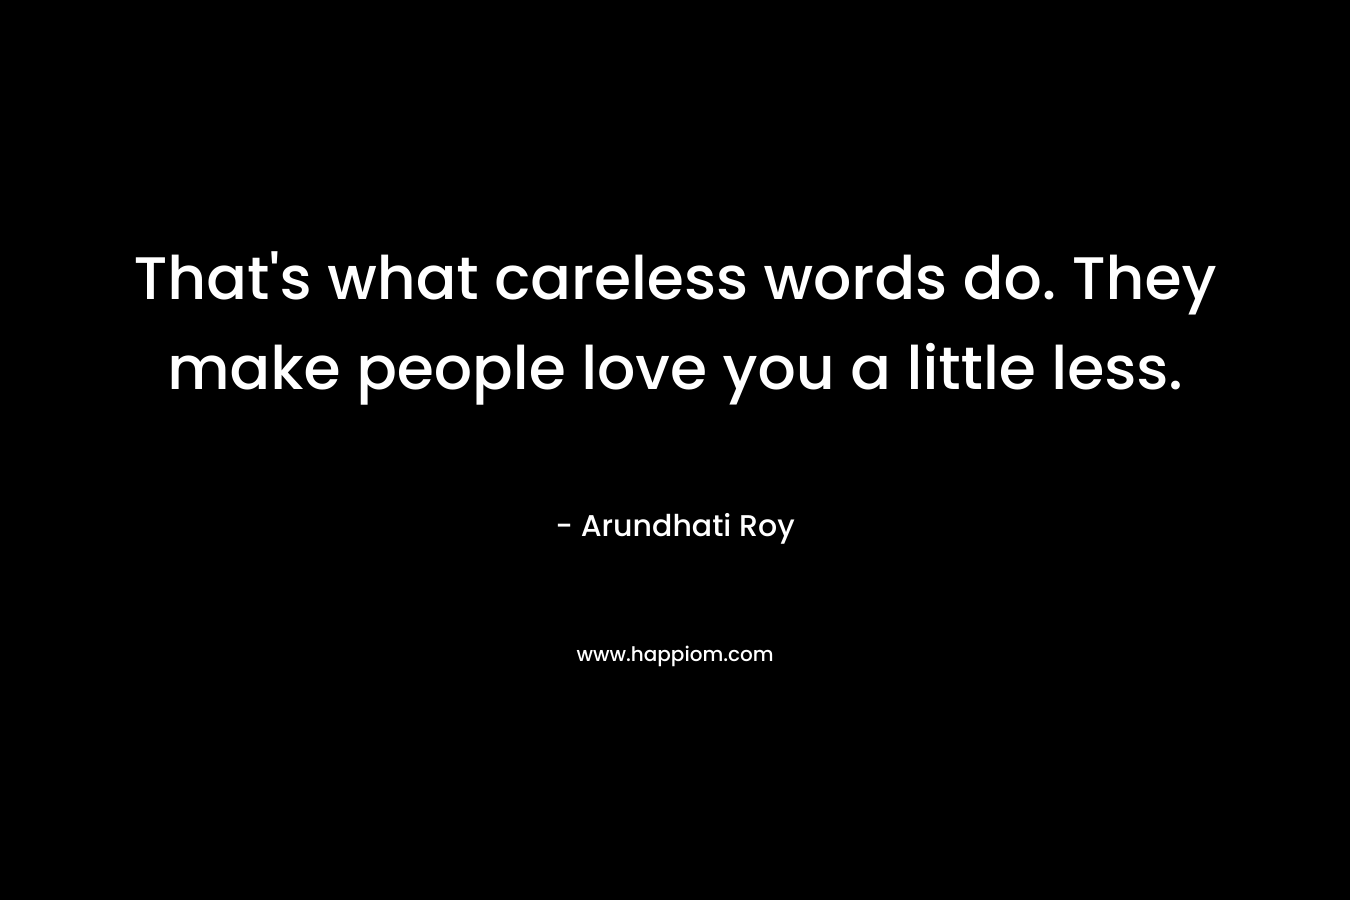 That’s what careless words do. They make people love you a little less. – Arundhati Roy